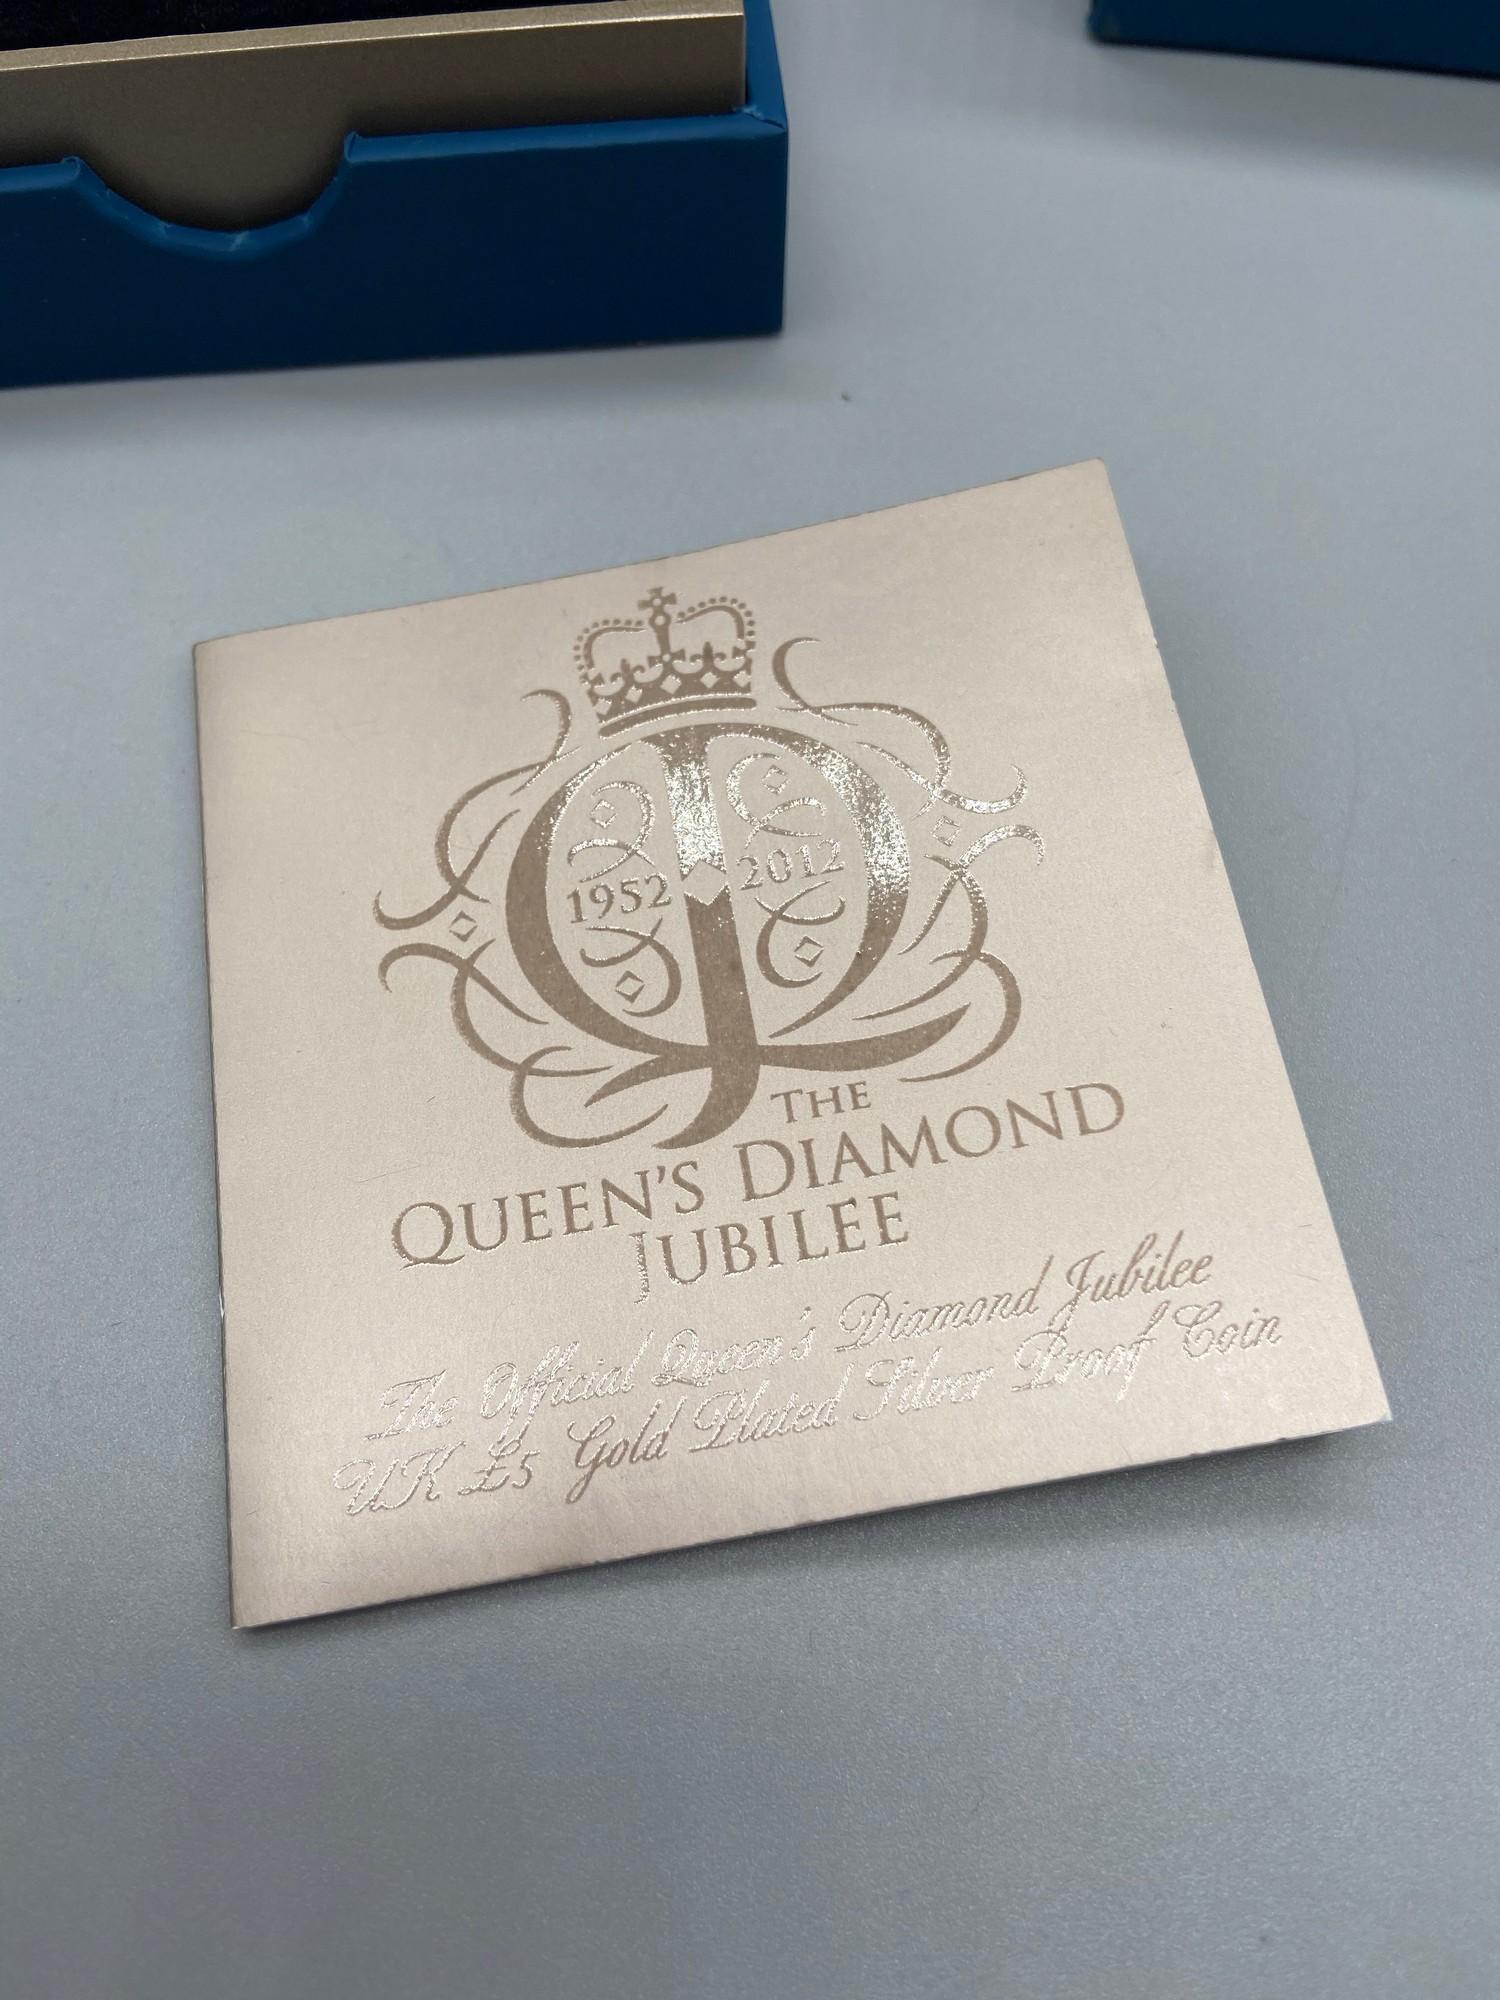 2012 Queens Diamond Jubilee gold plated silver proof five pound coin by The Royal Mint. Comes with a - Image 4 of 6